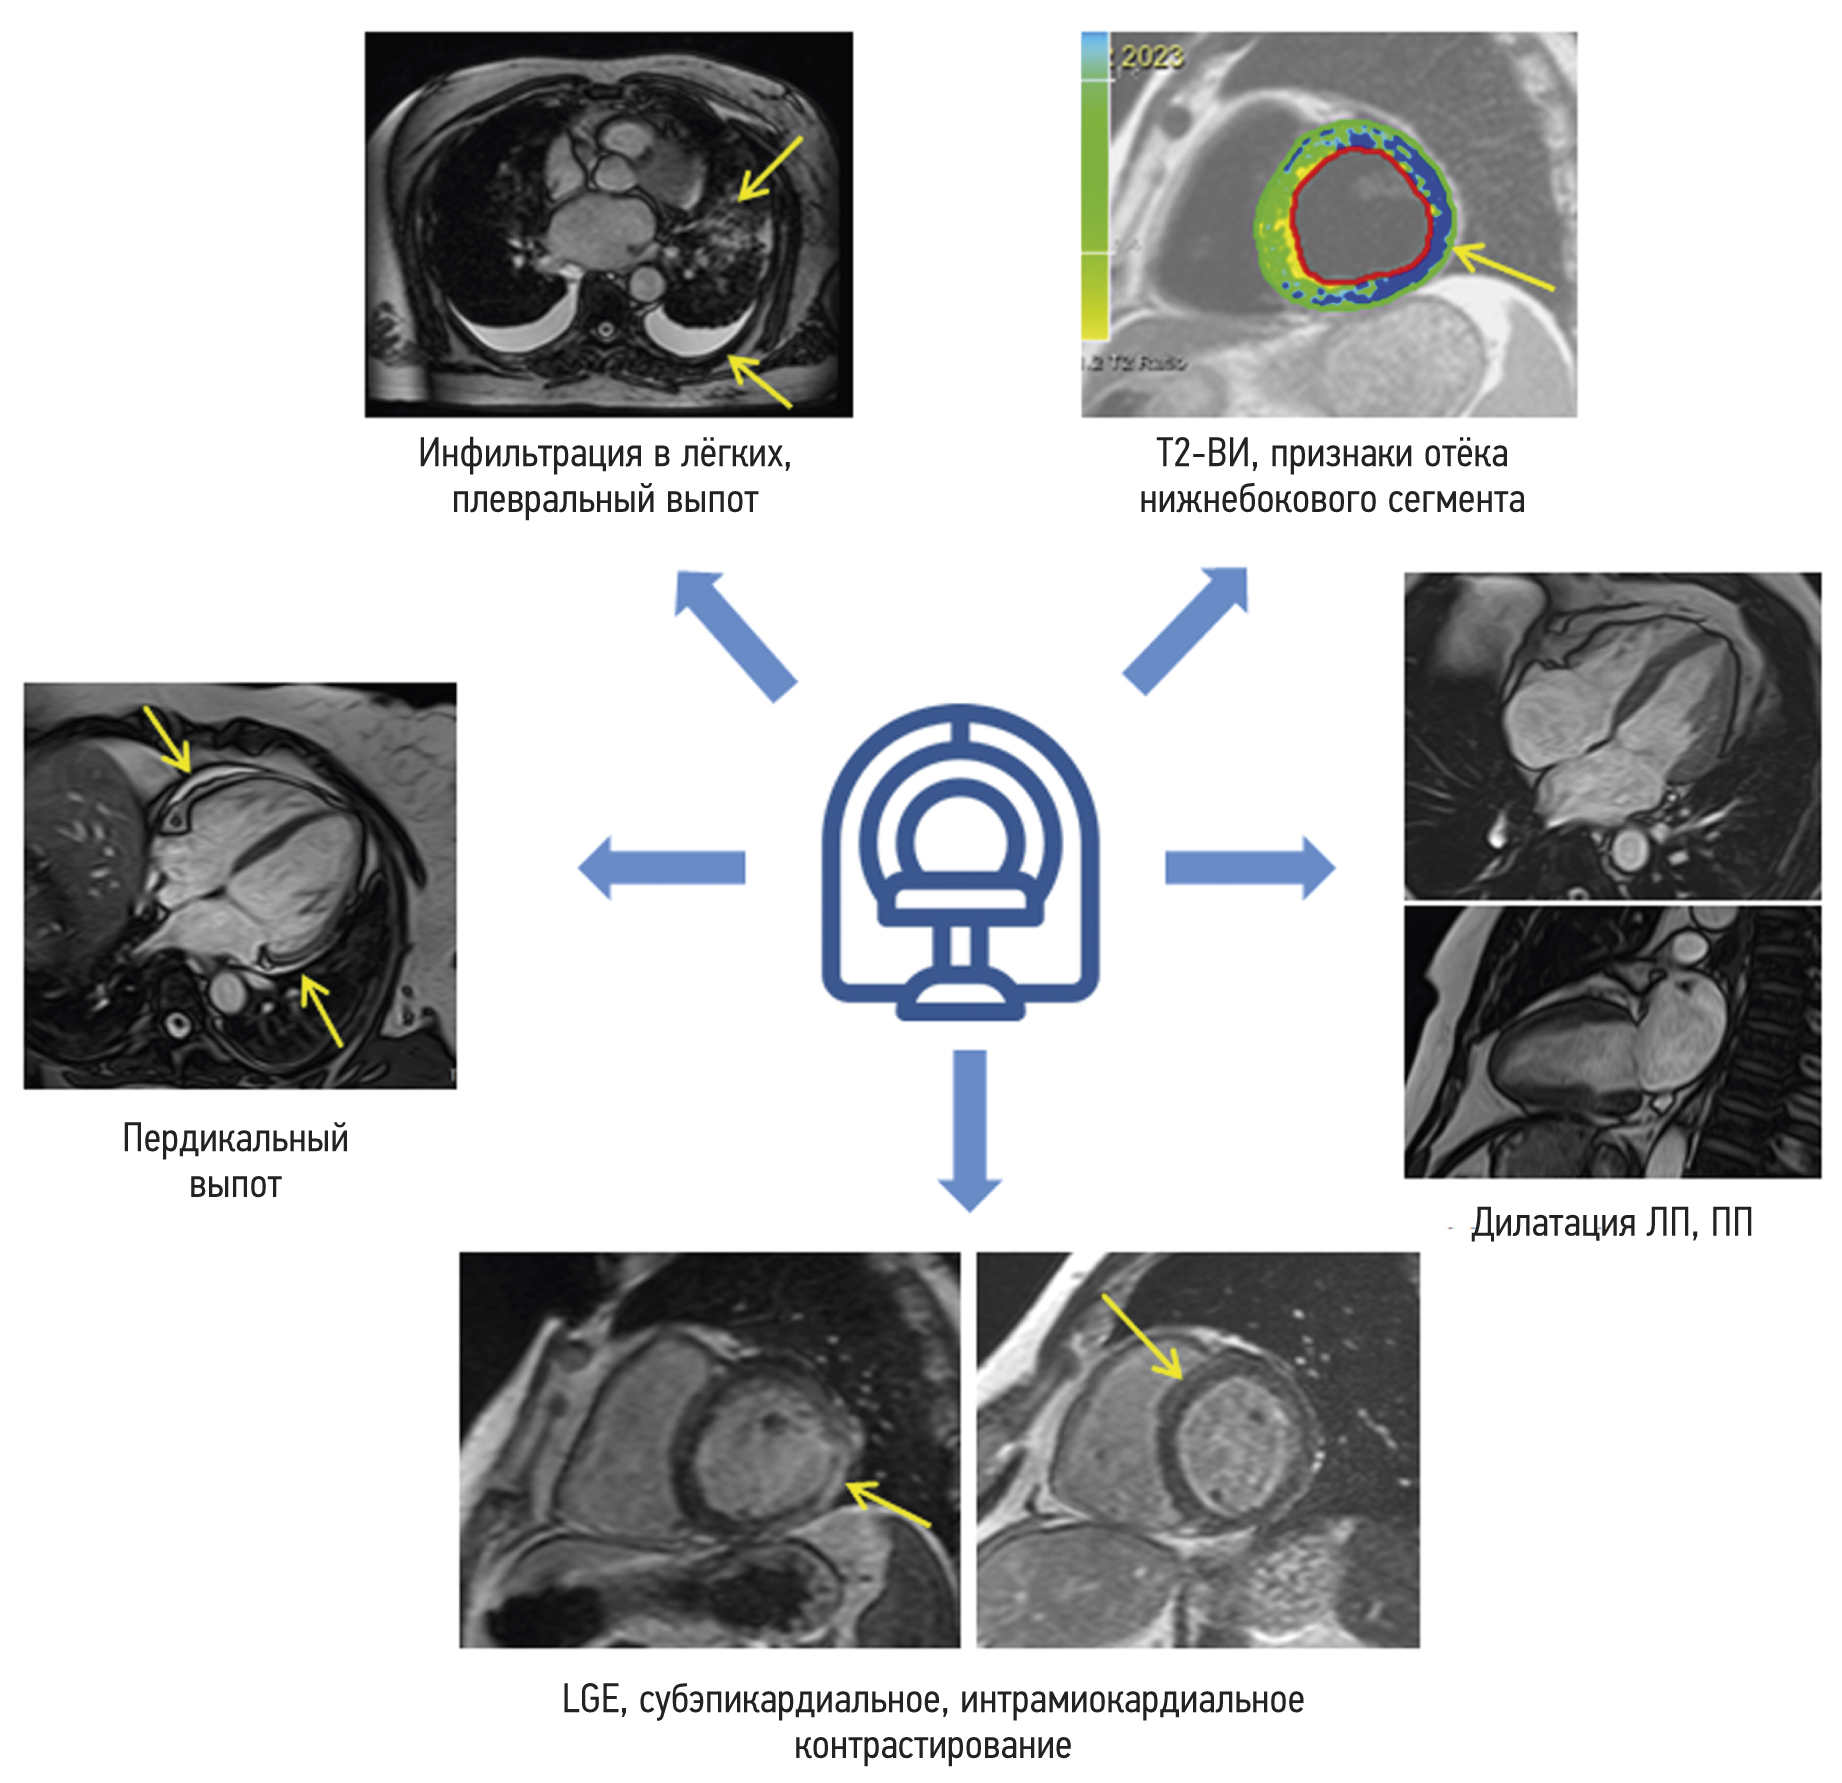 Cardiac magnetic resonance imaging in patients with history of COVID-19